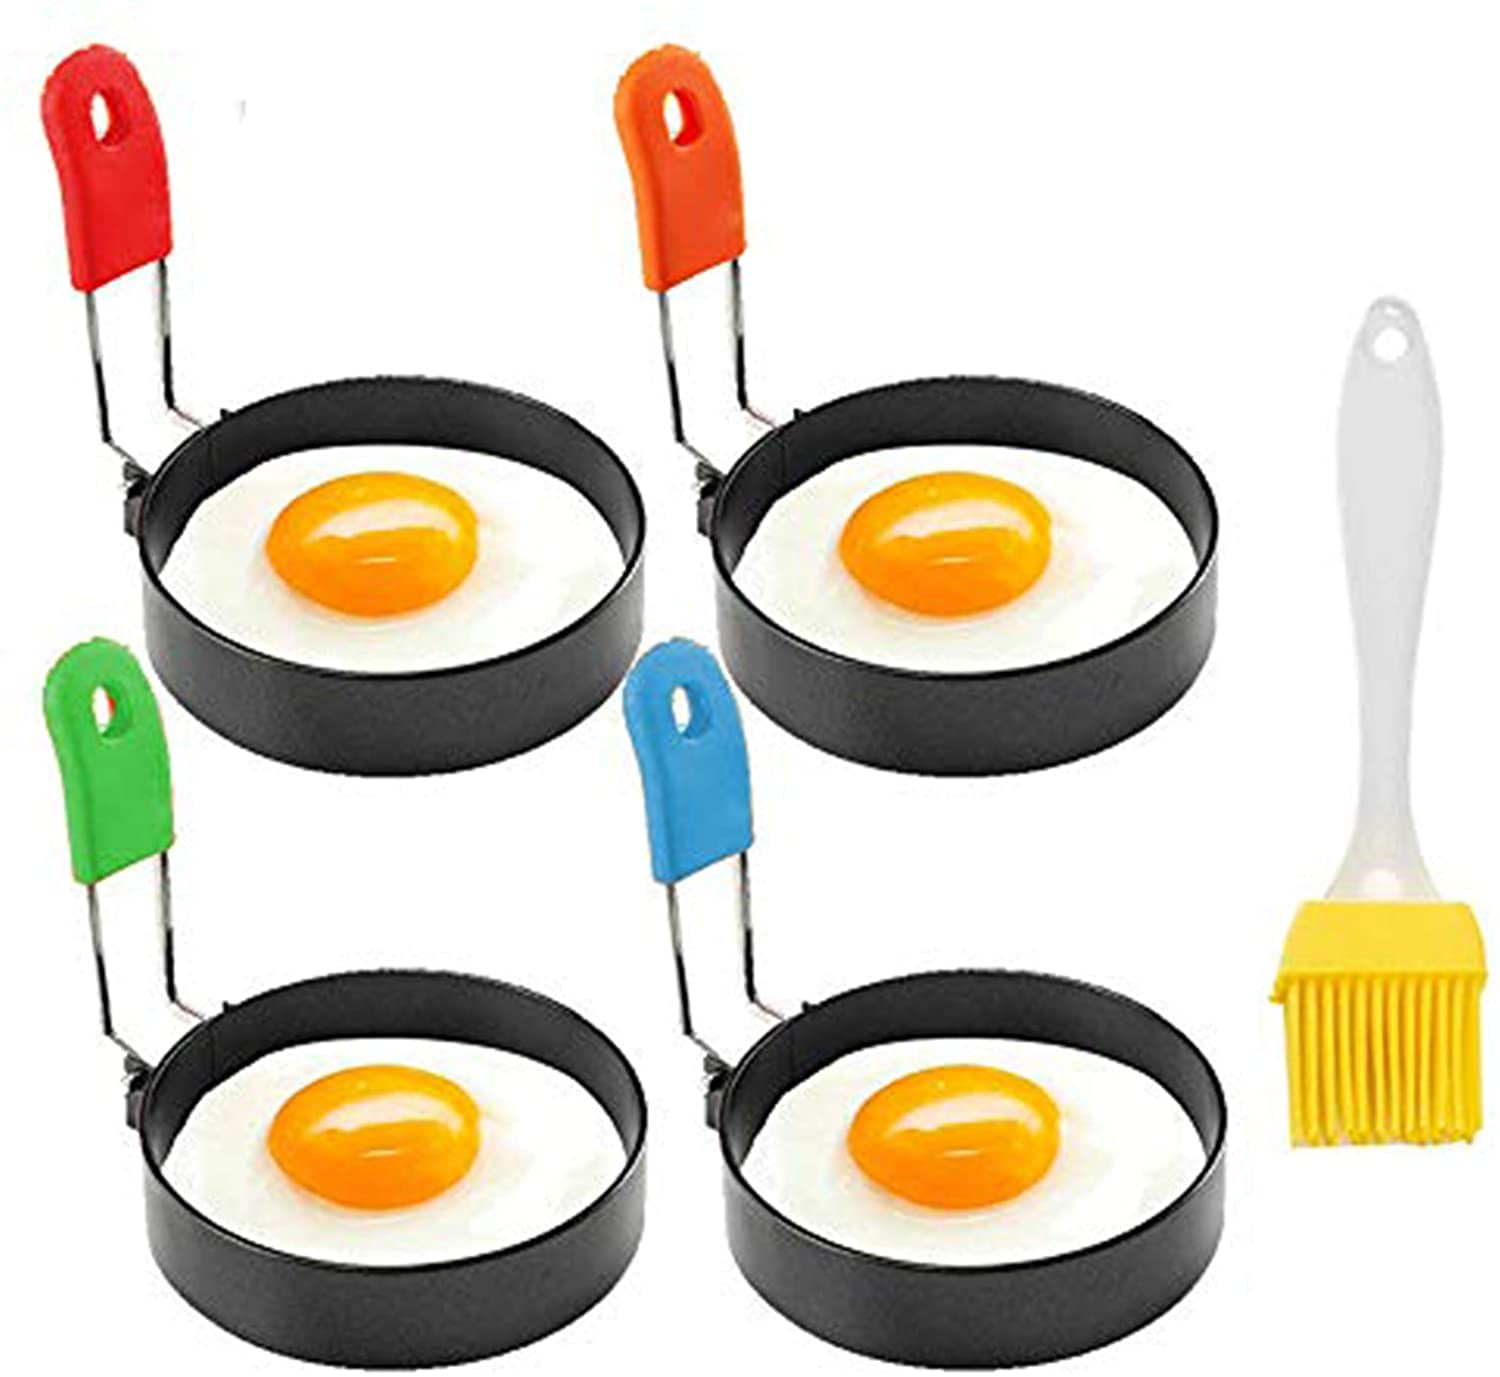 2/4 Pcs Metal Egg Frying Rings Circle Round Fried/Poach Mold Handle Non Stick ` 